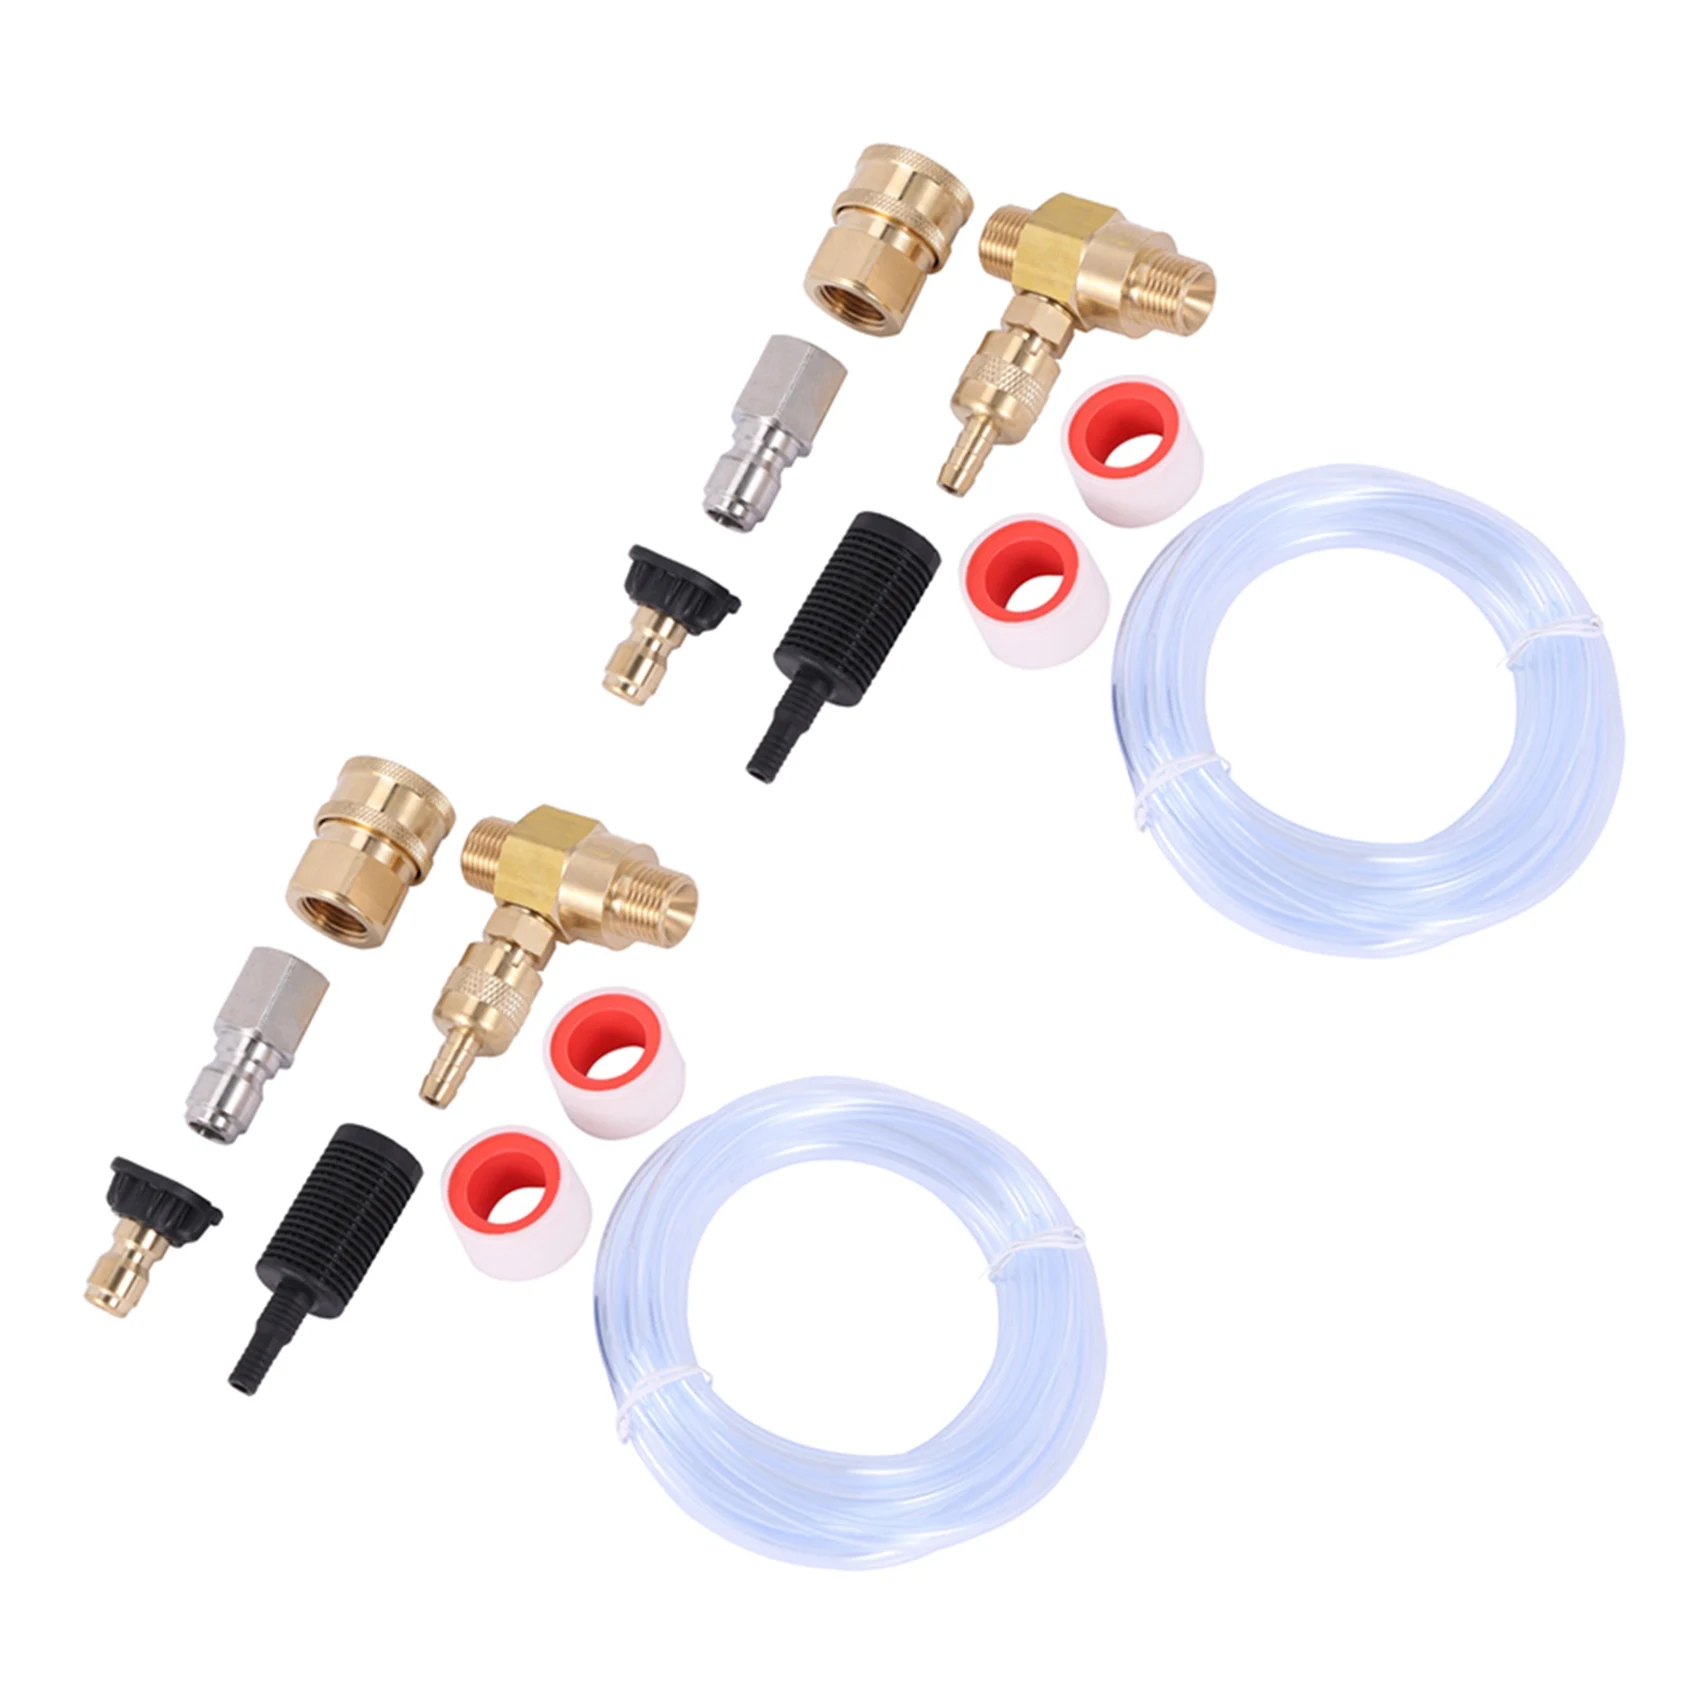 

2X Pressure Washer Chemical Injector Kit Adjustable Soap Dispenser 3/8 Inch Quick Connect 10 Ft Siphon Hose